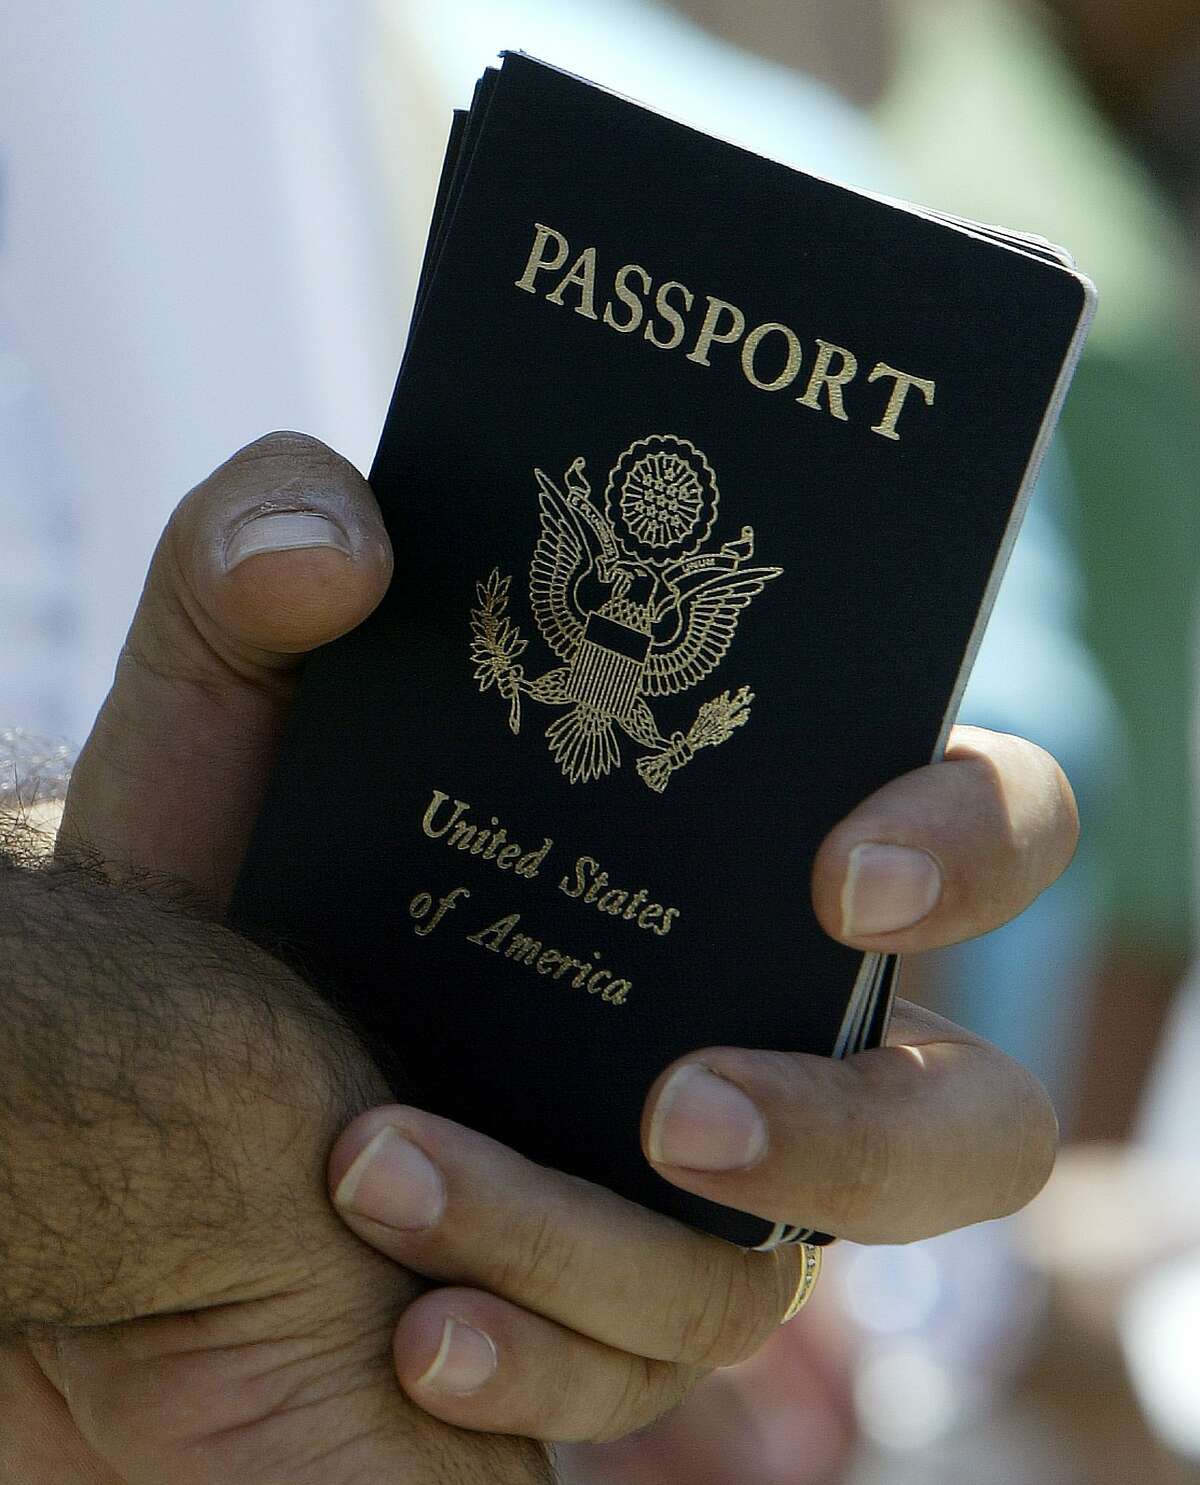 An evacuee from Lebanon holds his U.S. passport, as he waits in a line prior to his departure to the airport, at the international fairground of Nicosia, Cyprus, Thursday, July 20, 2006. Some 900 U.S. citizens, many of them of Lebanese origin, arrived on the cruise liner Orient Queen early Thursday, completing the first trip in a massive operation to evacuate thousands of U.S. citizens from wartorn Lebanon. (AP Photo/Thanassis Stavrakis)